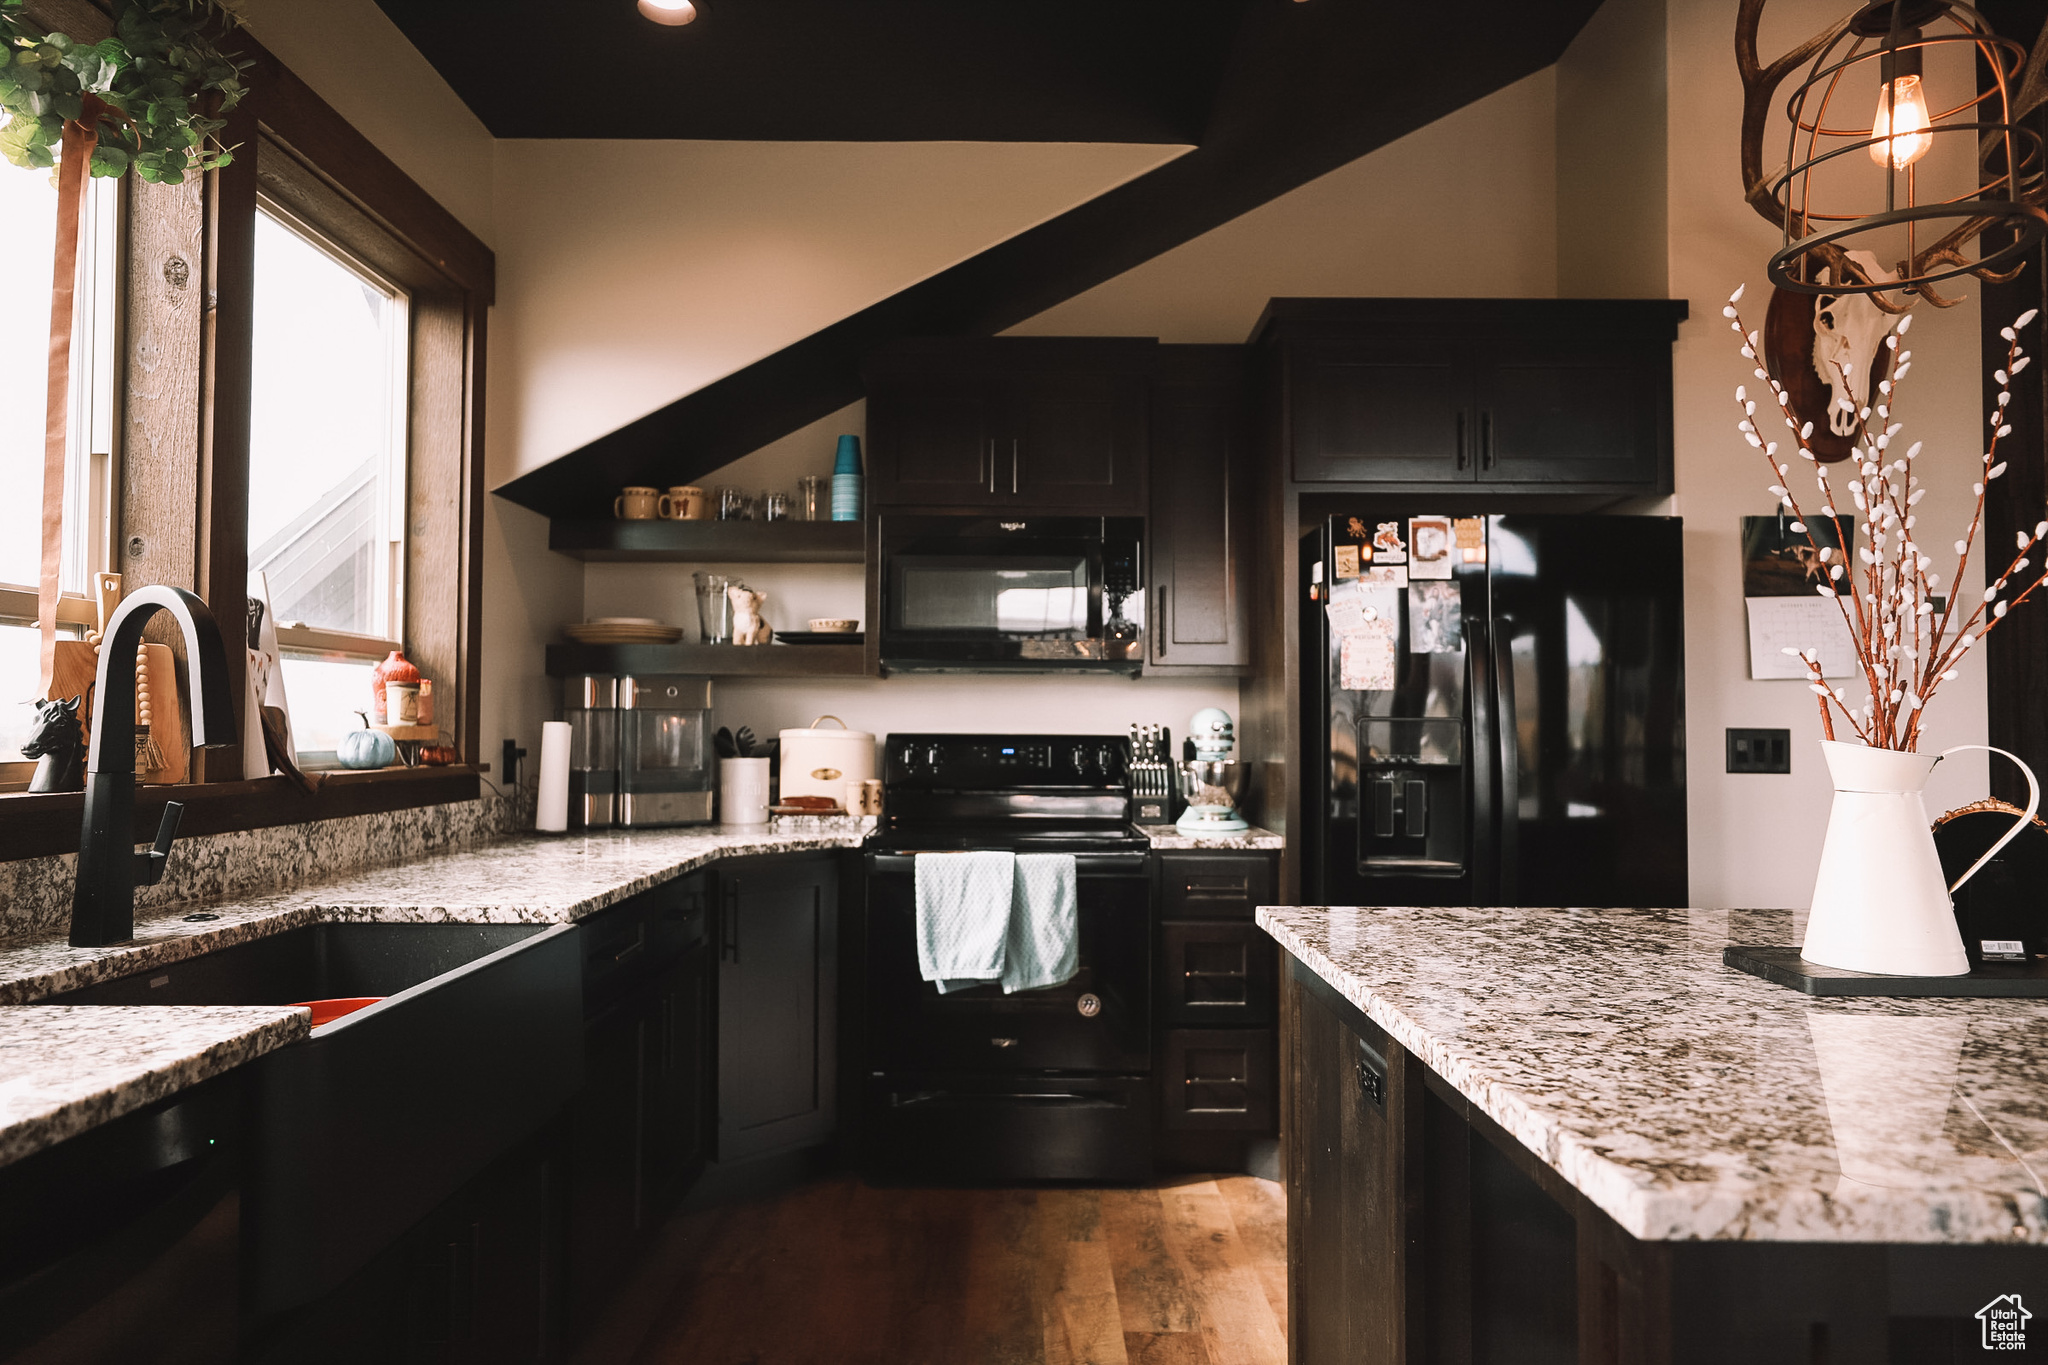 Kitchen featuring sink, dark hardwood / wood-style flooring, light stone counters, and black appliances